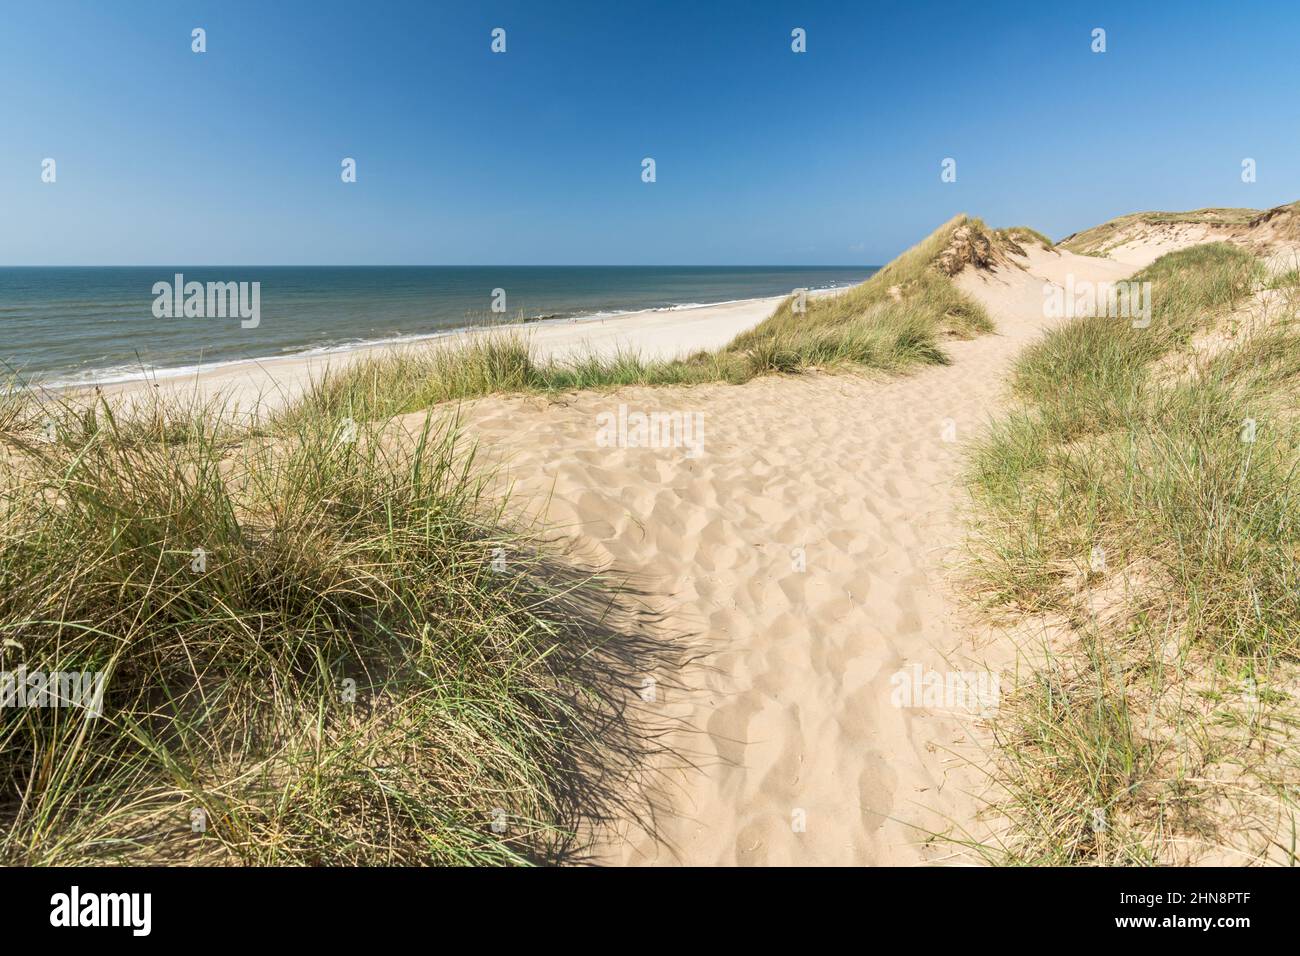 Hiking trail in the dunes near the ocean on the island of Sylt in Northern Germany Stock Photo